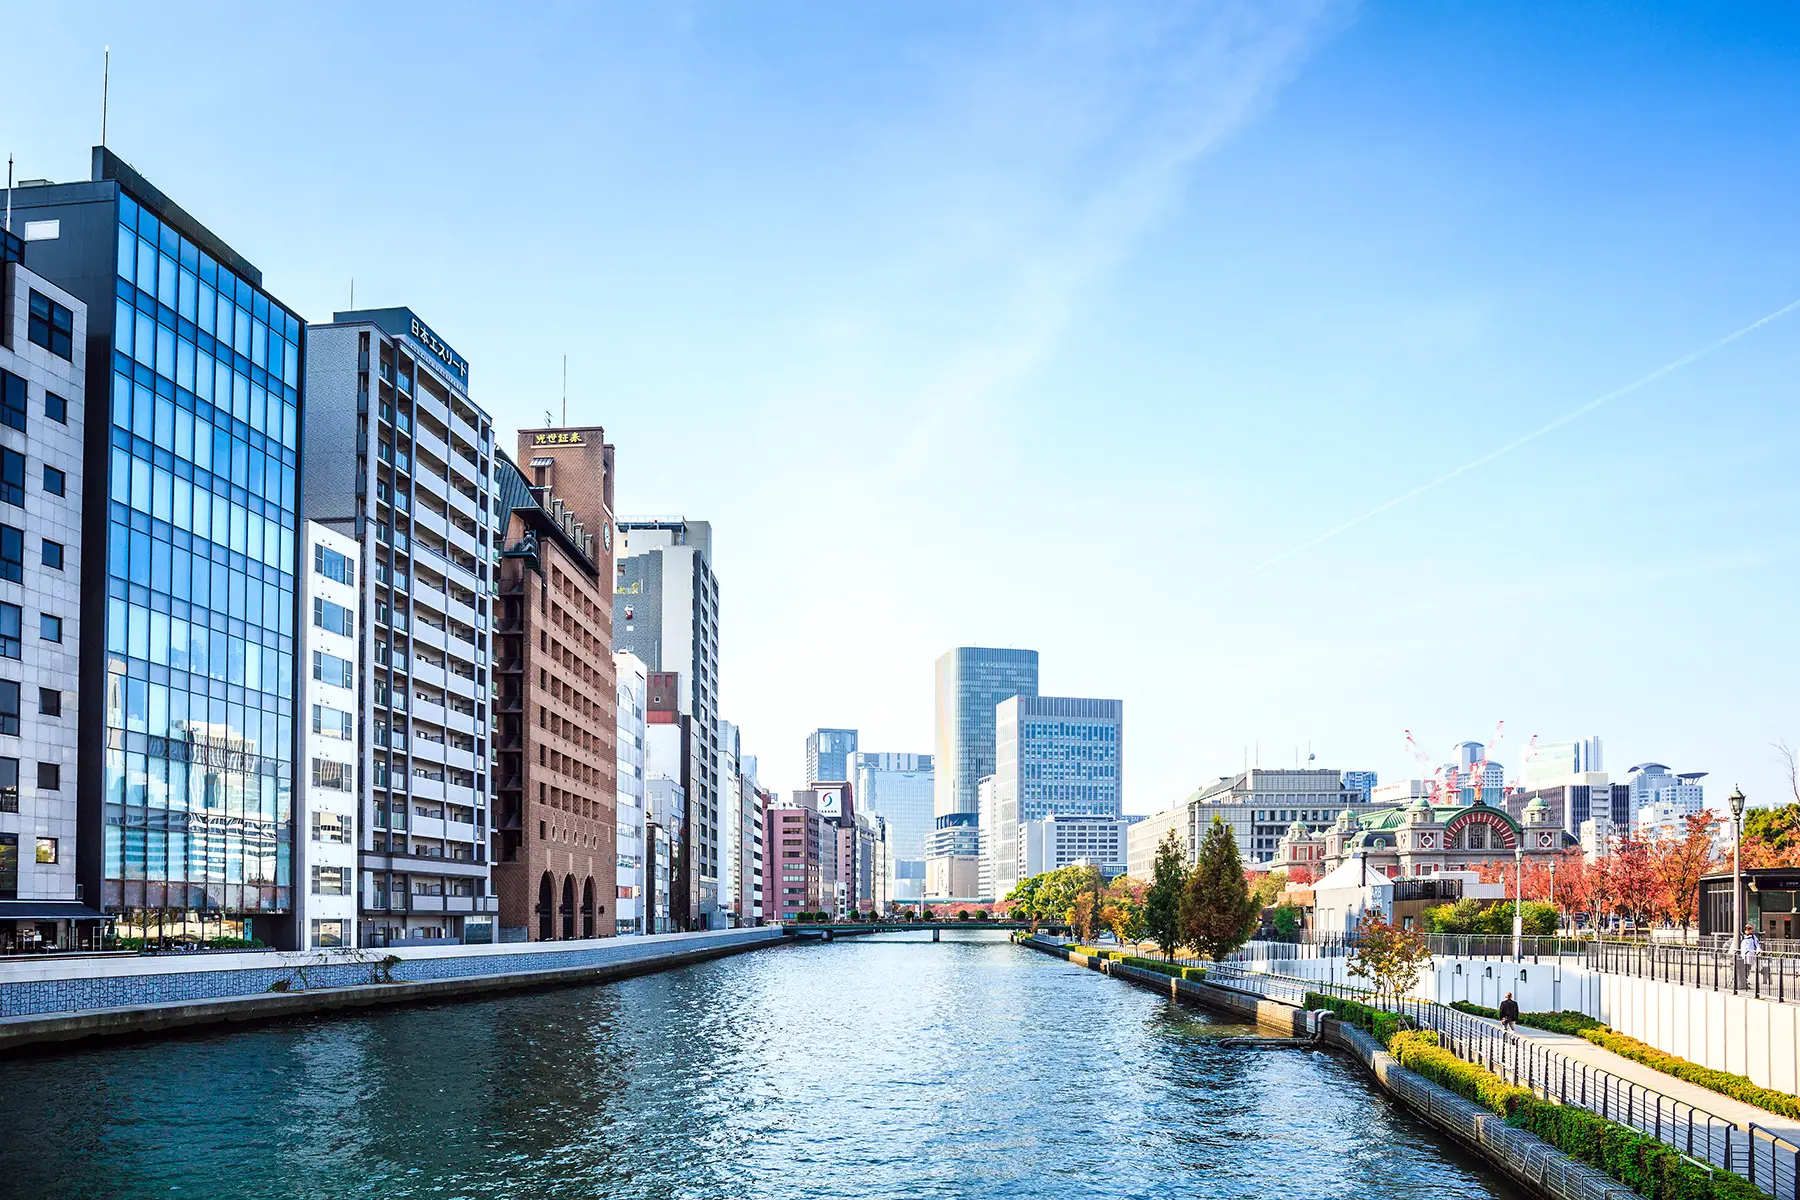 A canal in Osaka city in Japan on a sunny autumn day